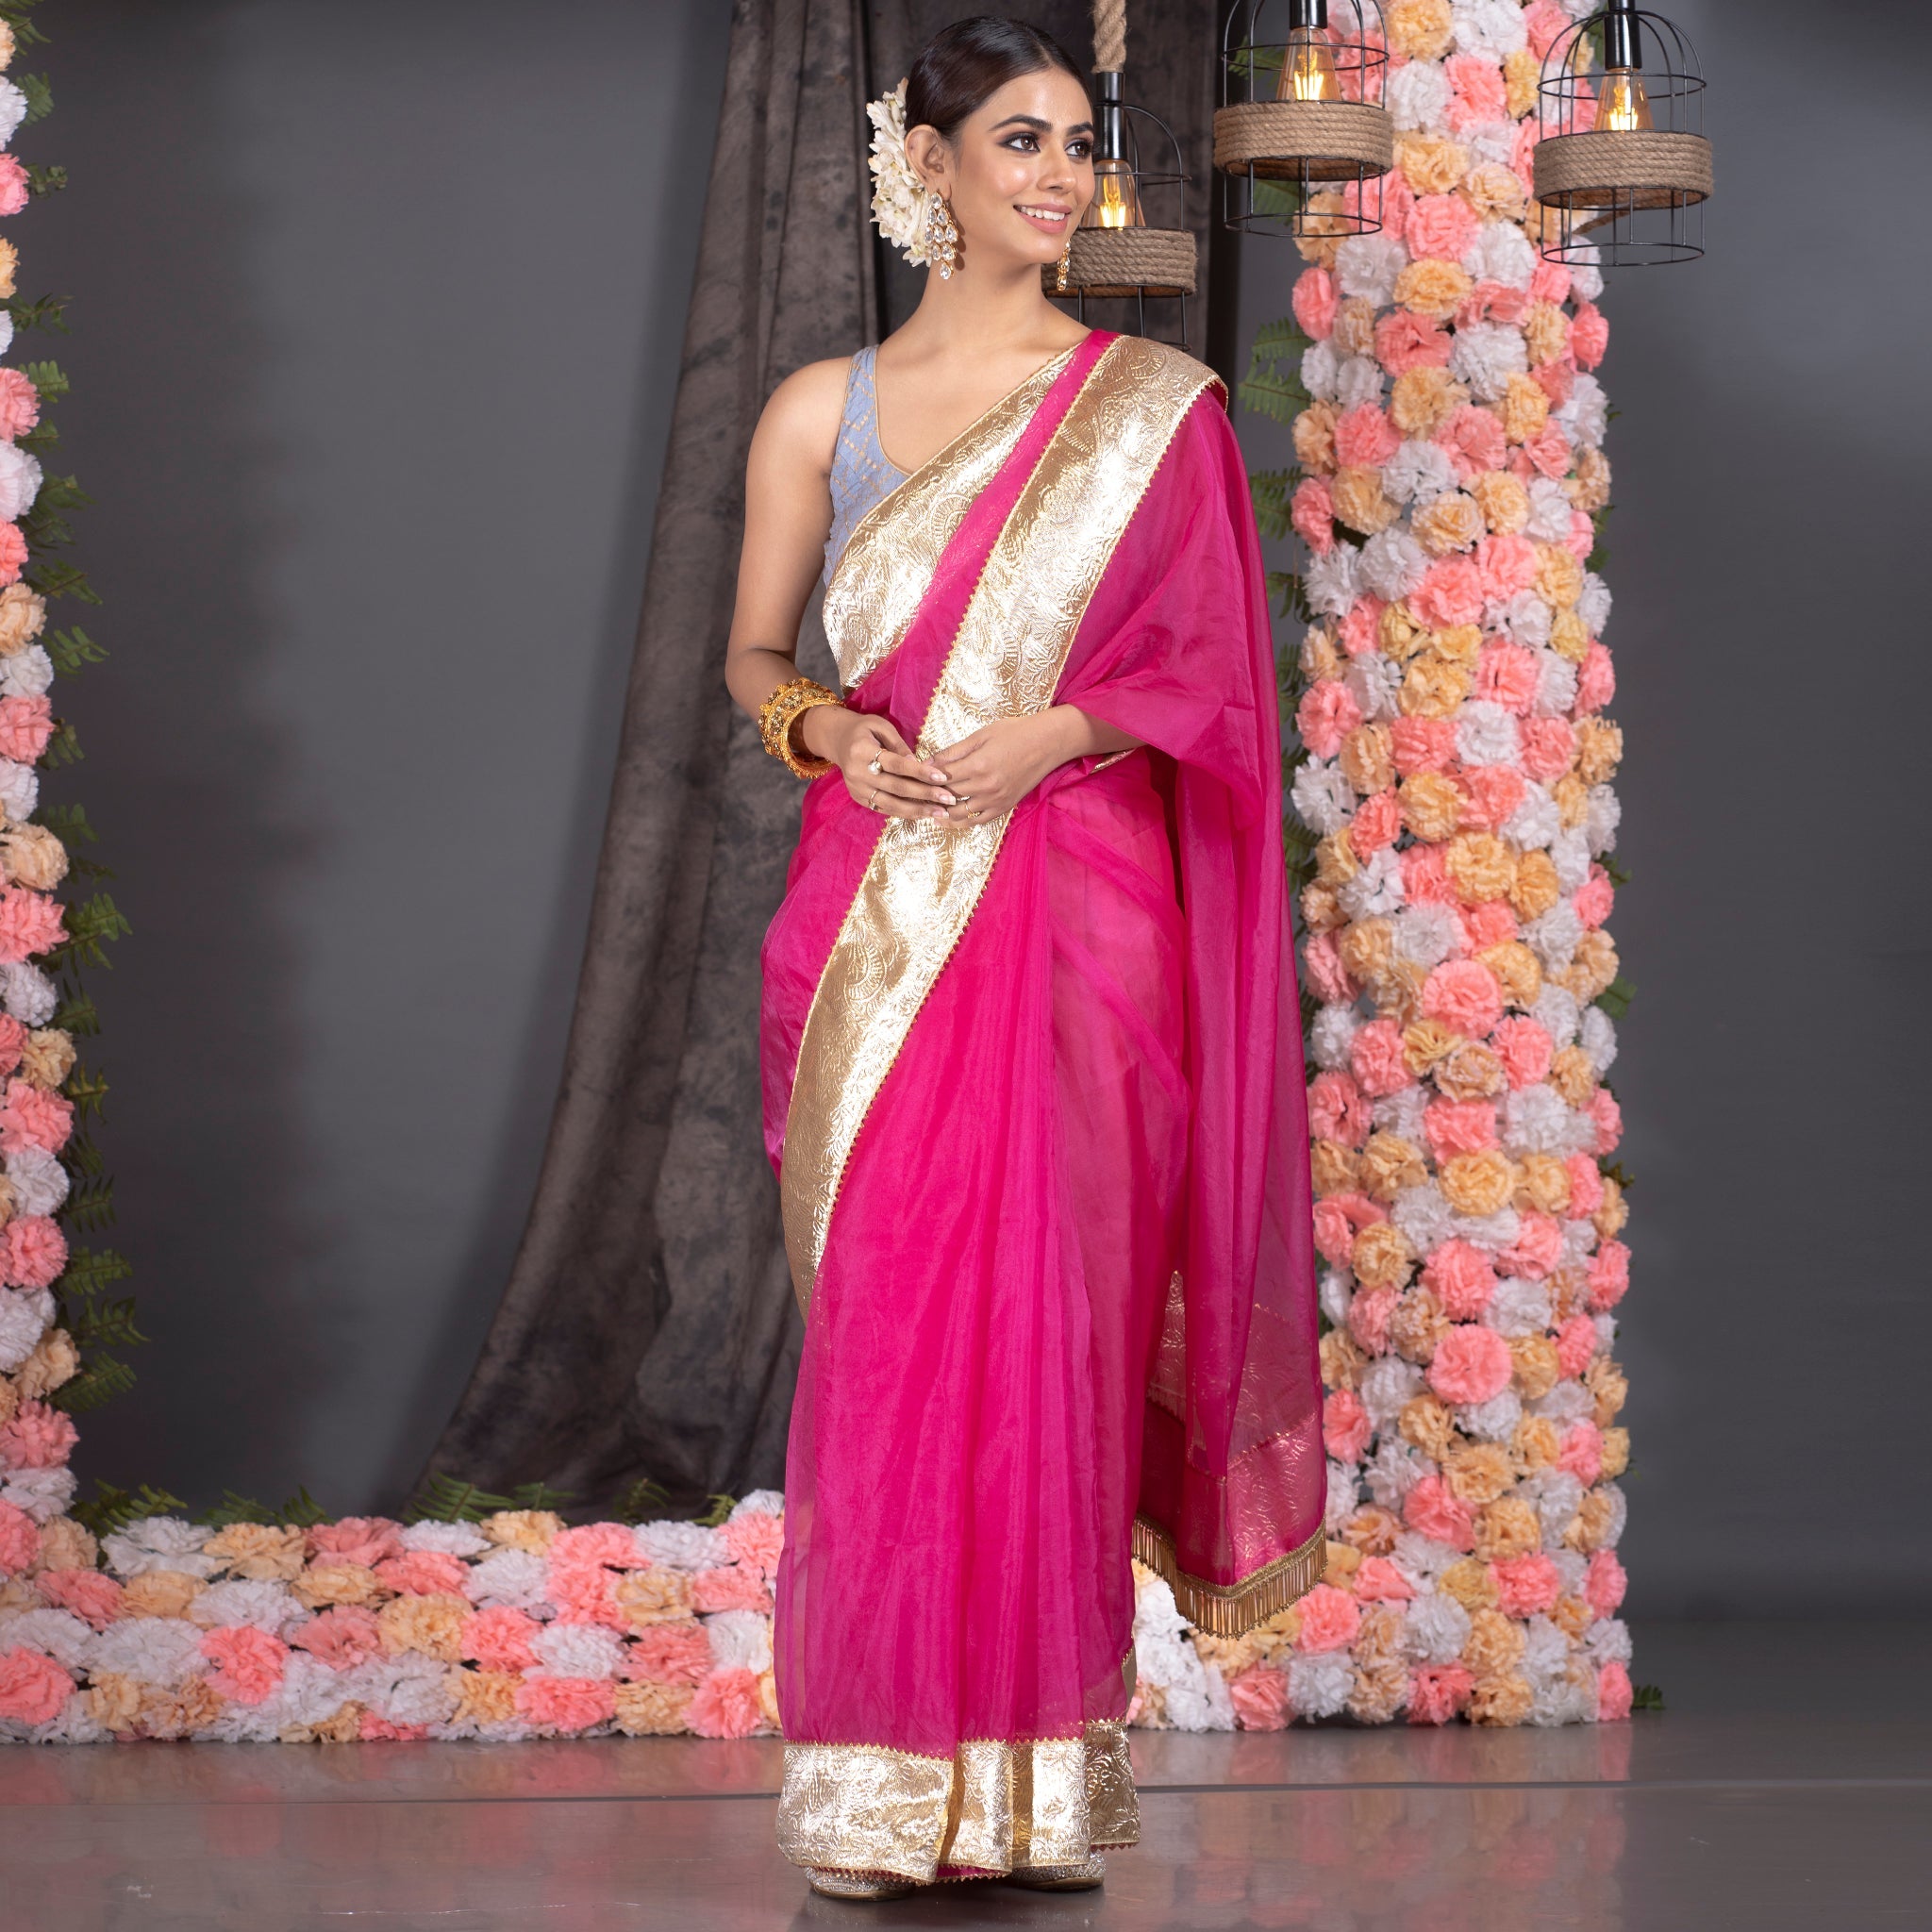 Women's Hot Pink Organza Saree With Gold Gota Border And Fringe Lace - Boveee